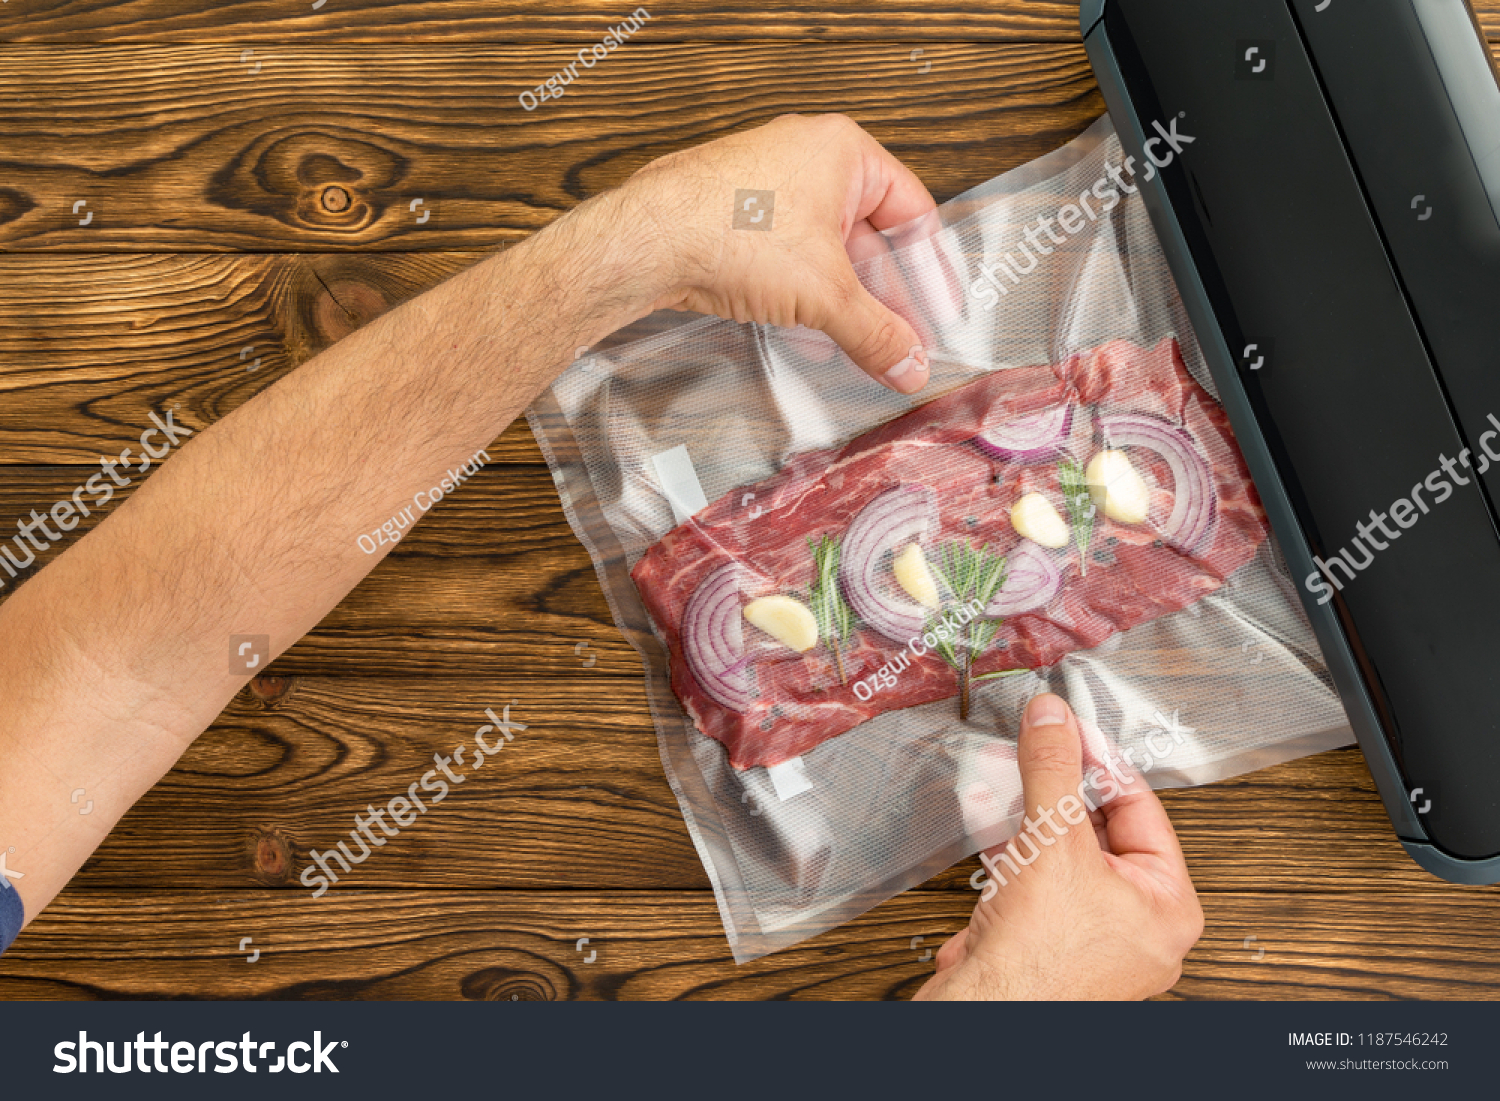 Unidentified adult man sliding plastic packaged meat with onion and garlic into black machine to preserve meat #1187546242